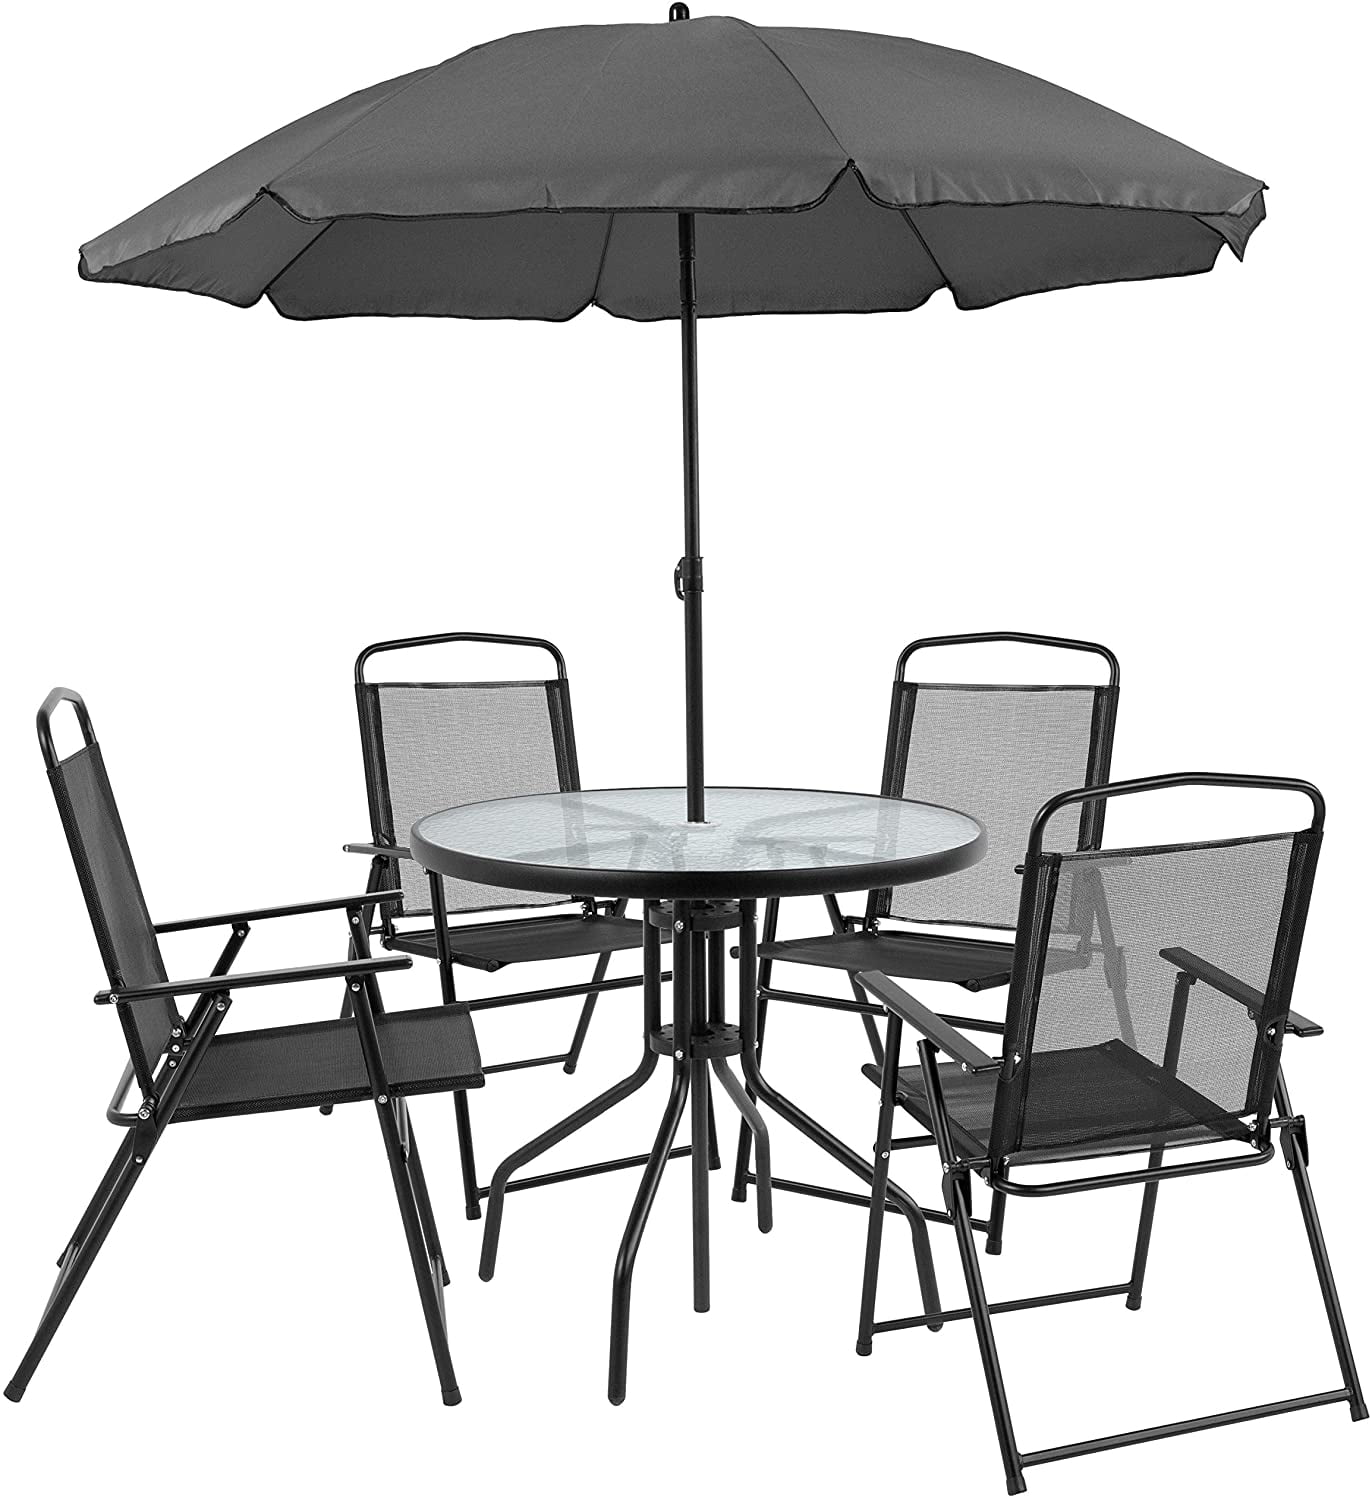 Flash Furniture Nantucket 6 Piece Black Patio Garden Set With Table Umbrella And 4 Folding Chairs Com - Outdoor Patio Table With Umbrella Set